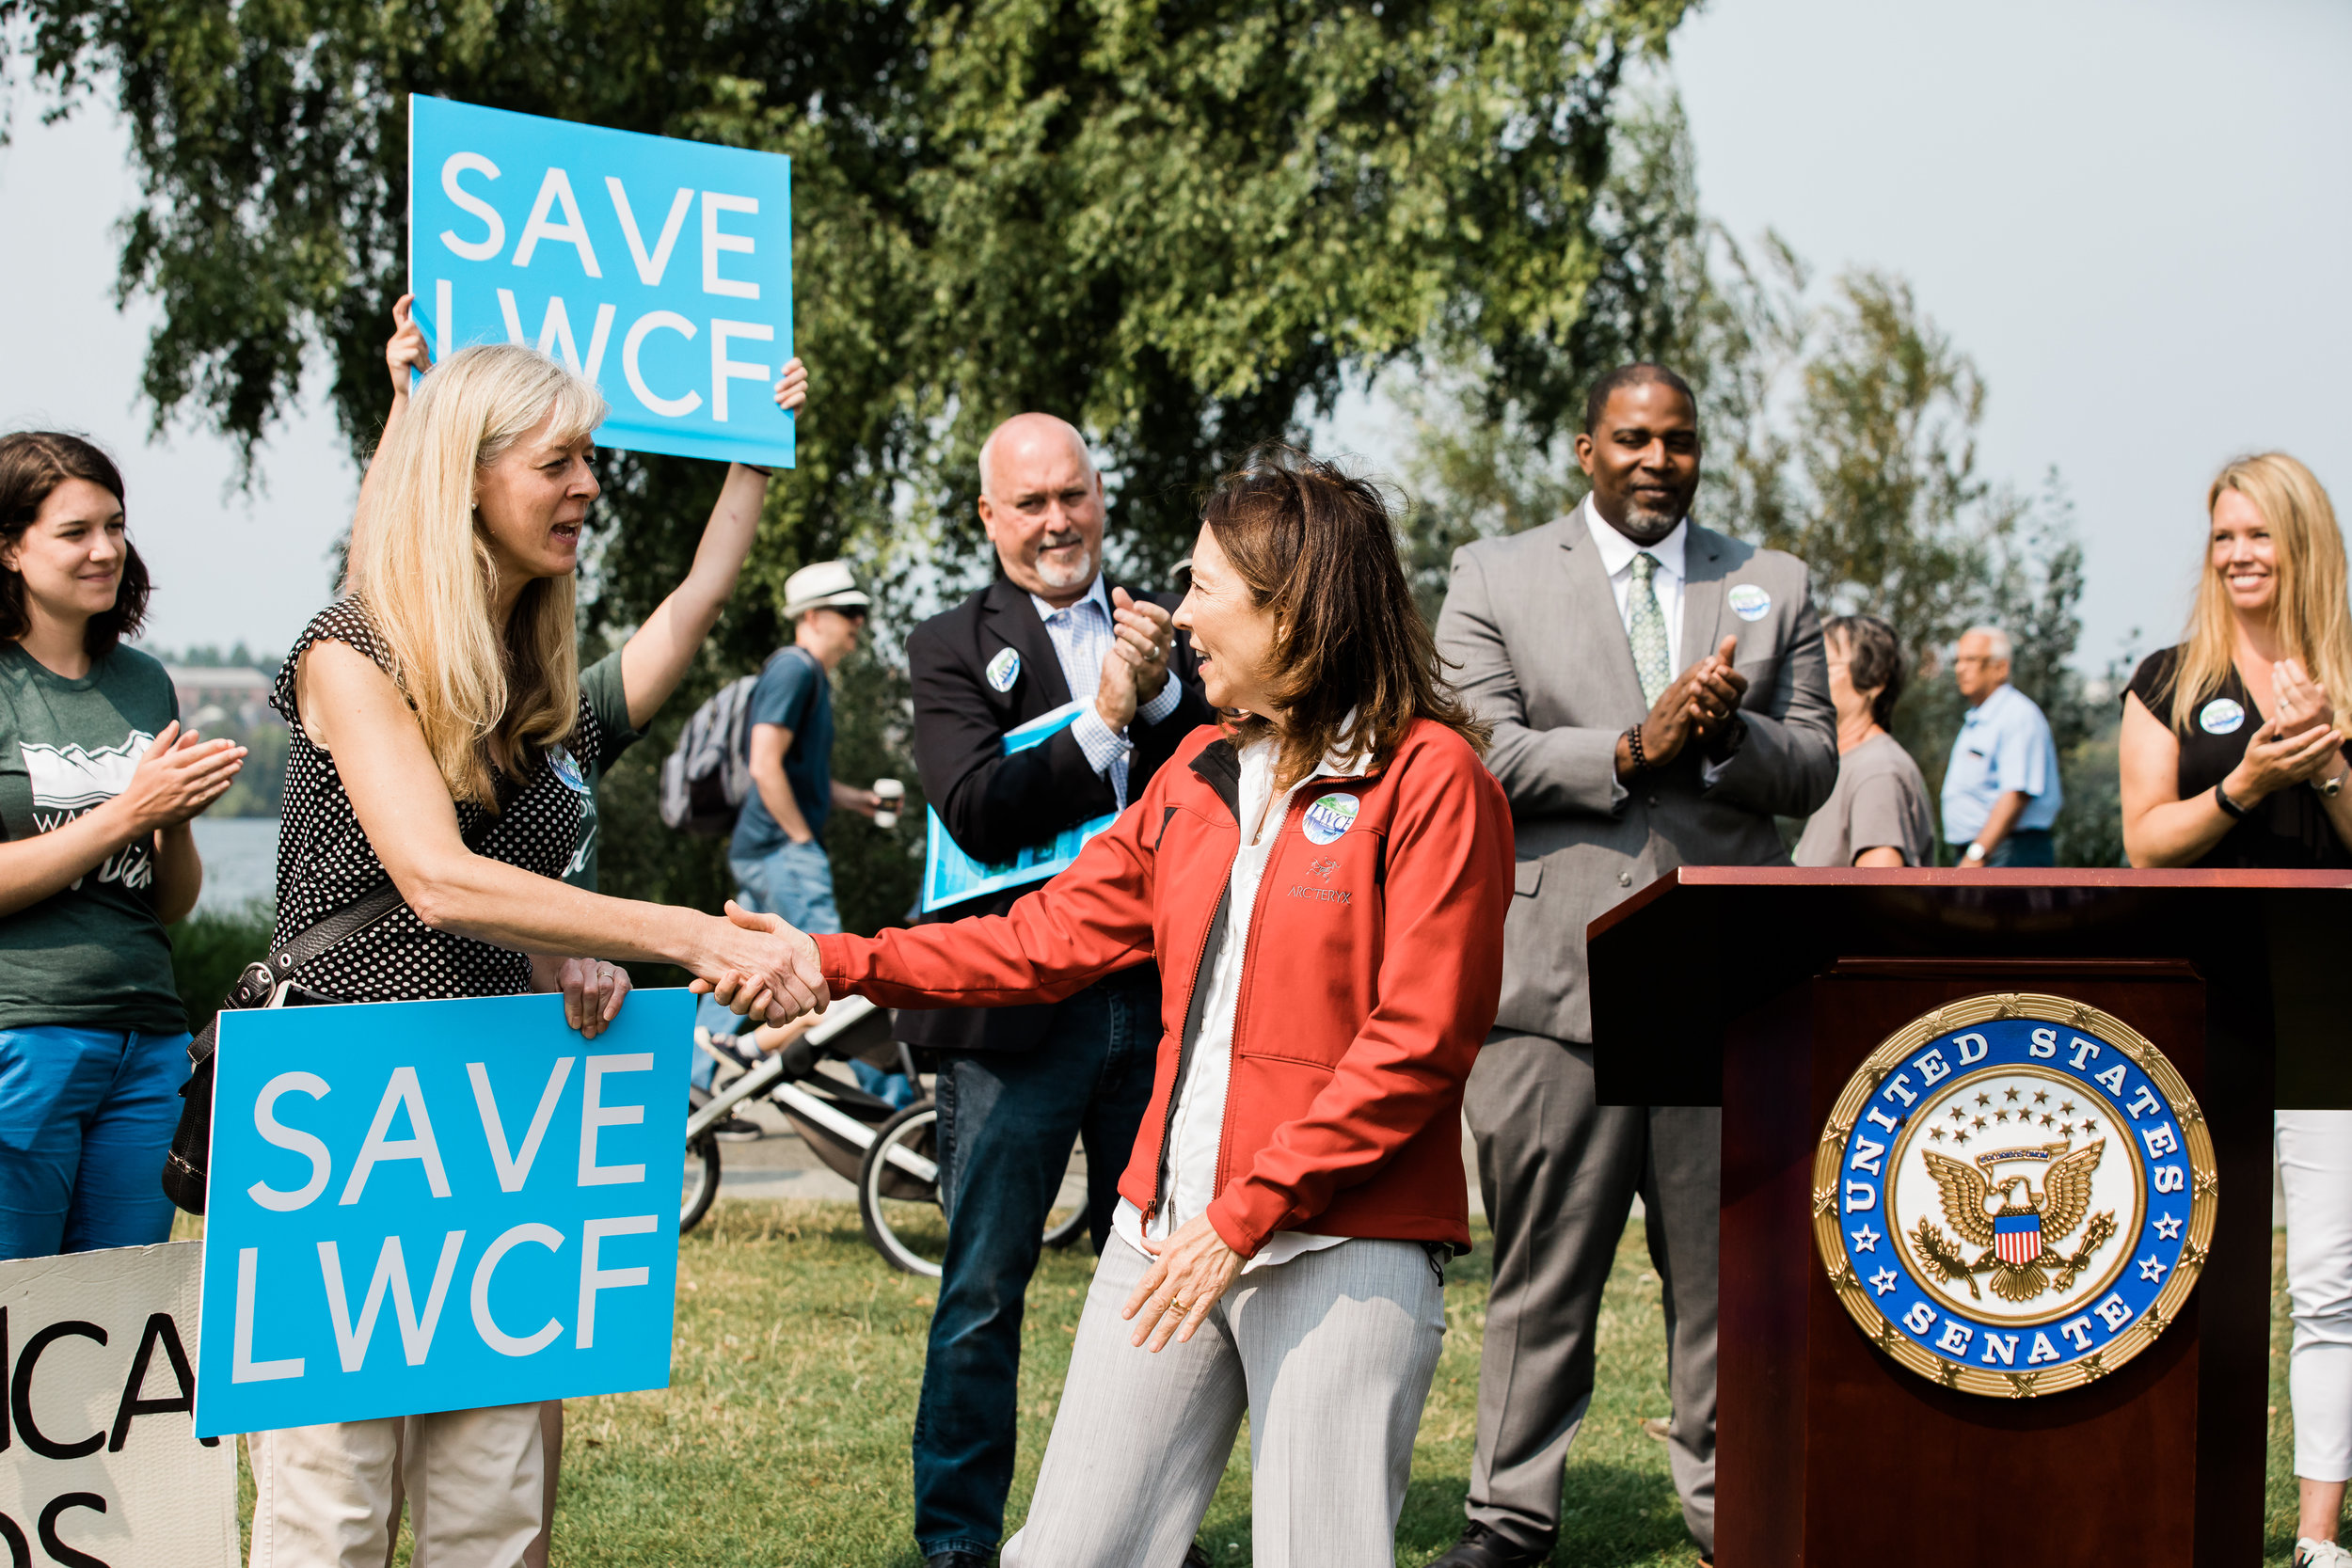  We are part of a nationwide coalition of more than 1400 organizations calling for permanent reauthorization and full funding for LWCF. Here, Joanna Grist from the national  LWCF Coalition  shakes hands with Sen. Cantwell. Photo by Stevie Rotella 